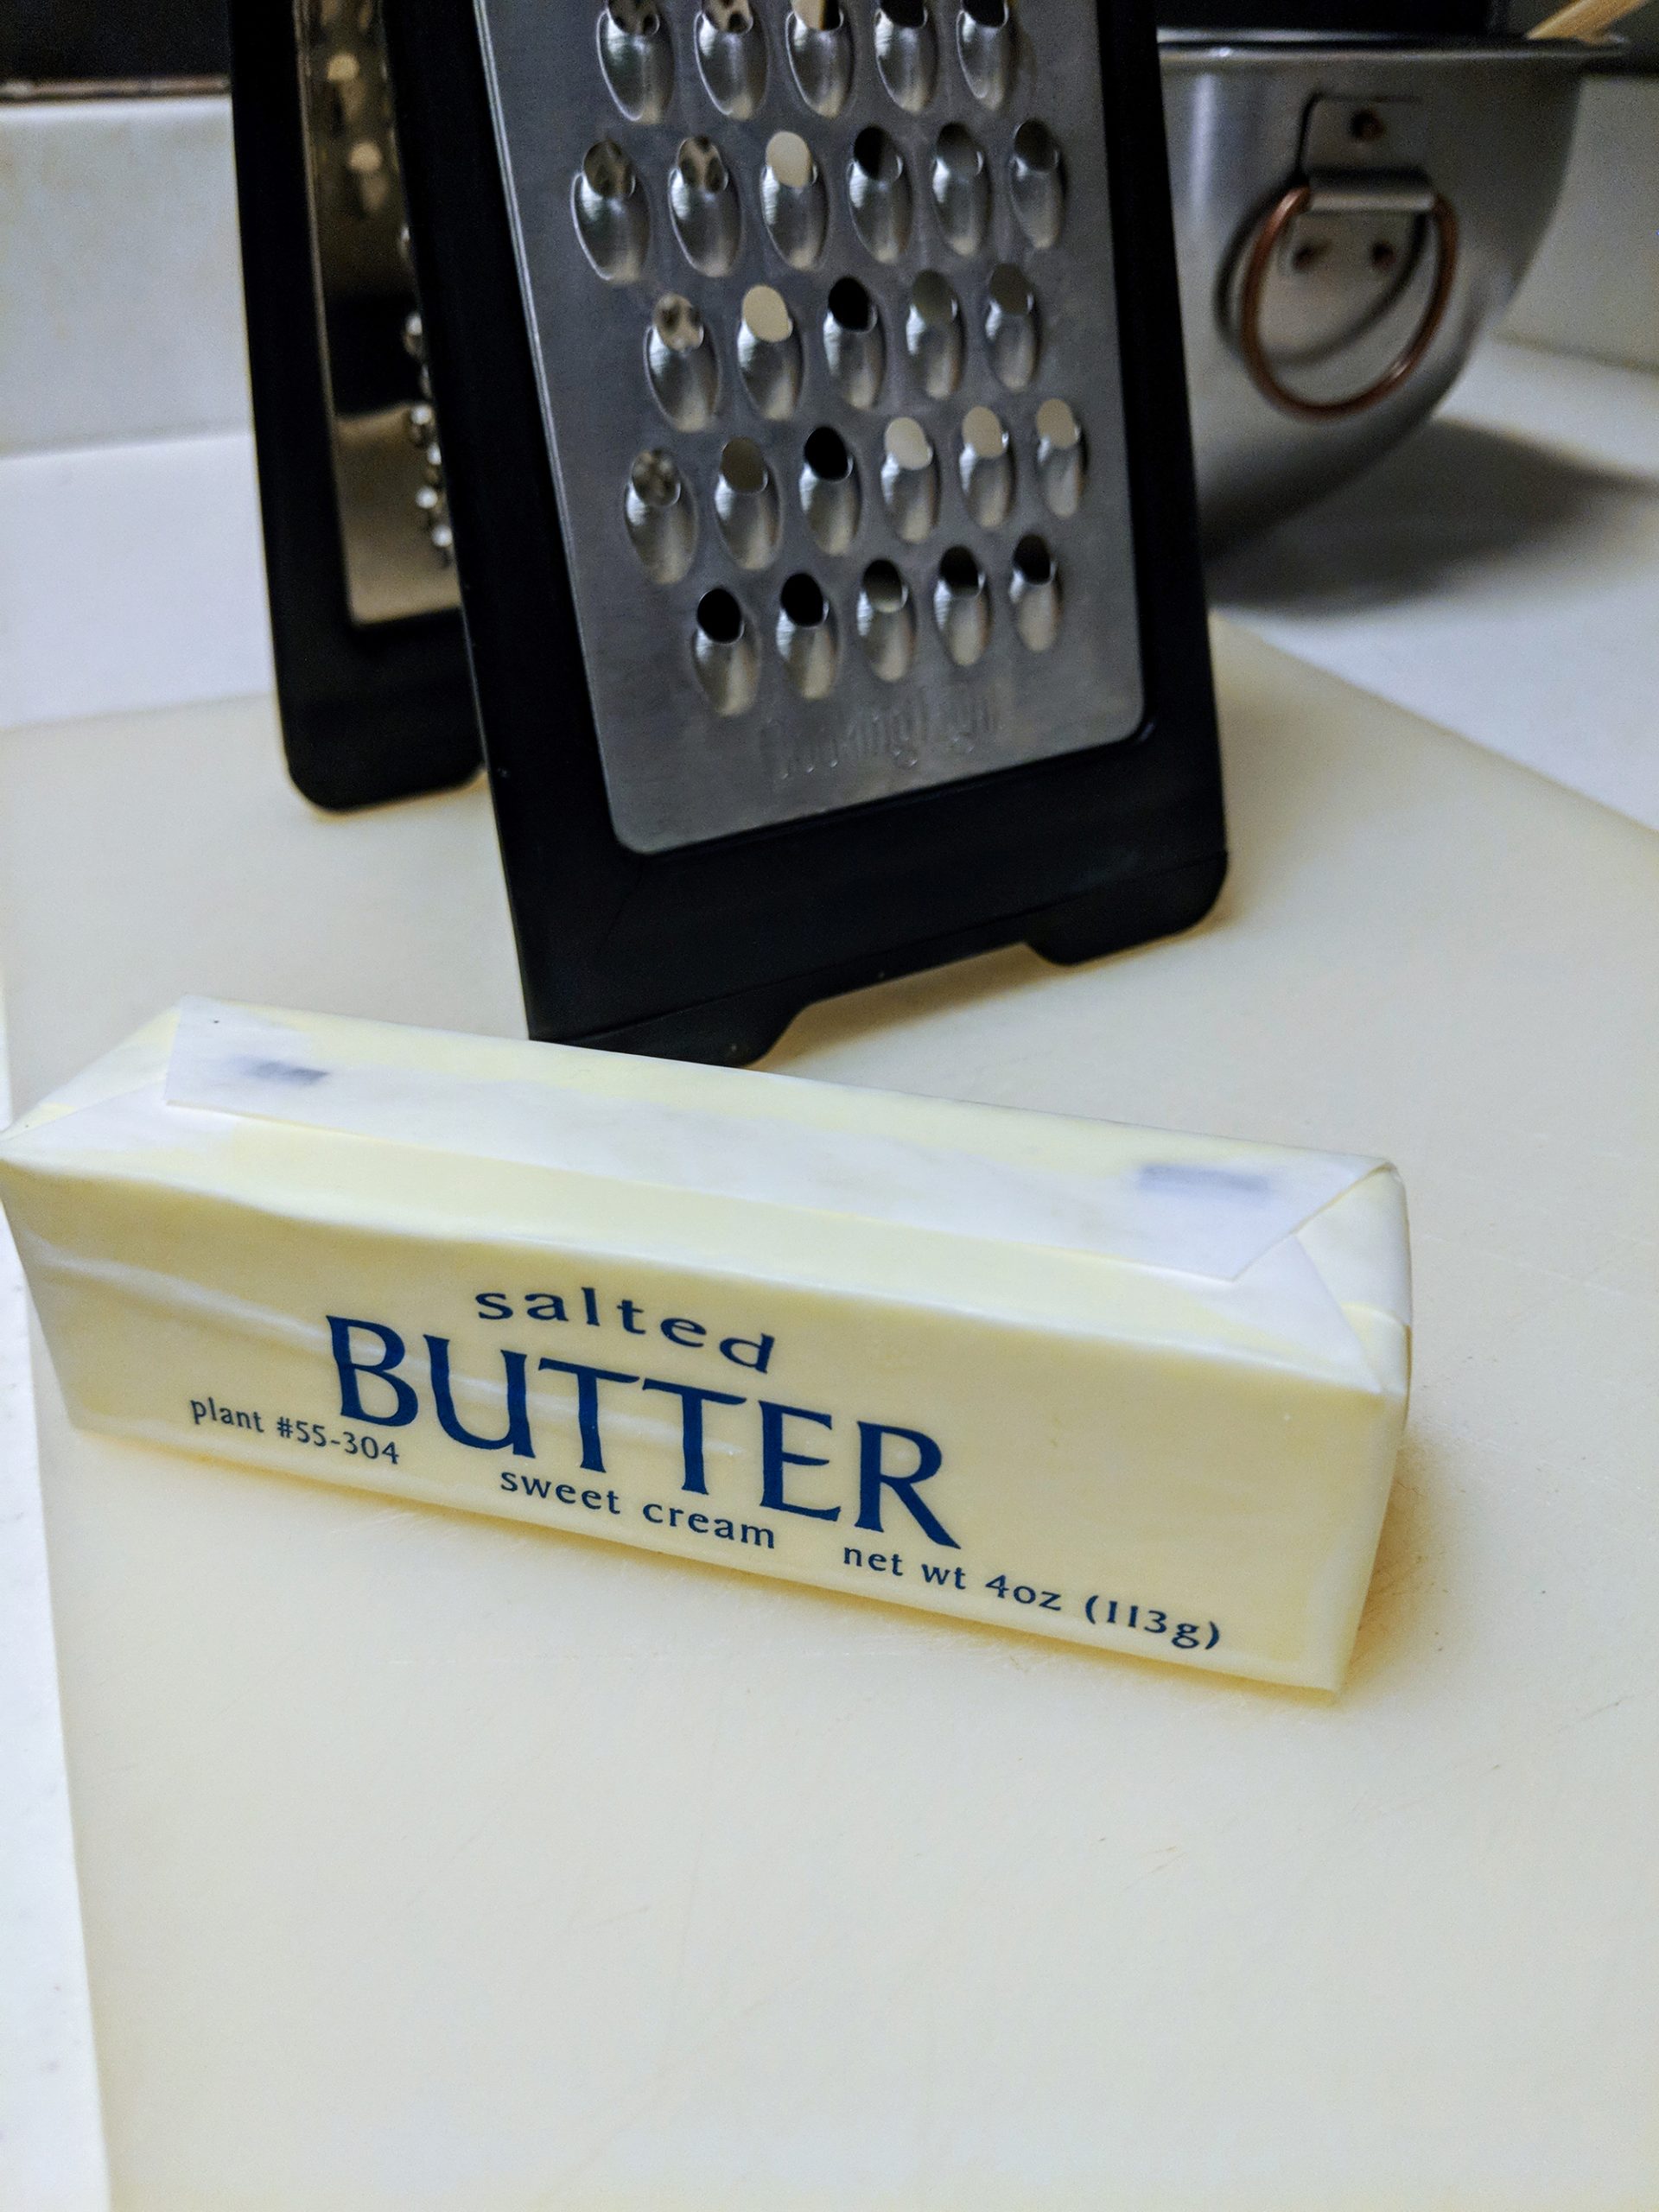 Remove your chilled butter from the freezer and dice it into small pieces. You can use a knife and cutting board to chop your butter into little cubes